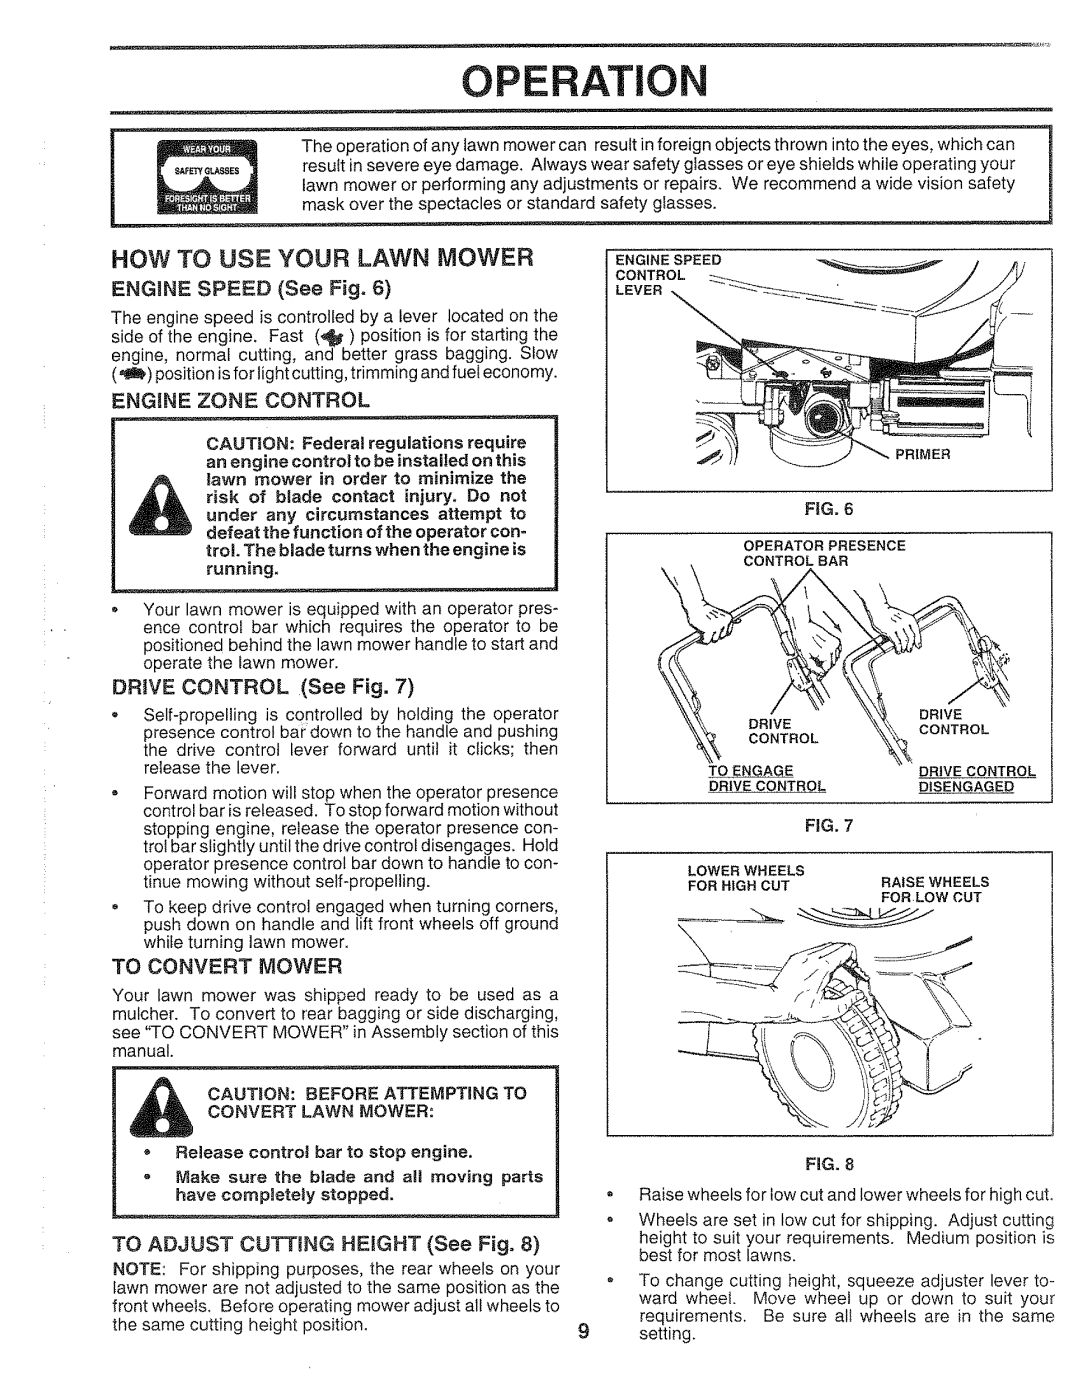 Sears 917.372851 Operatic, How To Use Your Lawn Mower, ENGINE SPEED See Fig, Engine Zone Control, DR VE CONTROL See Fig 